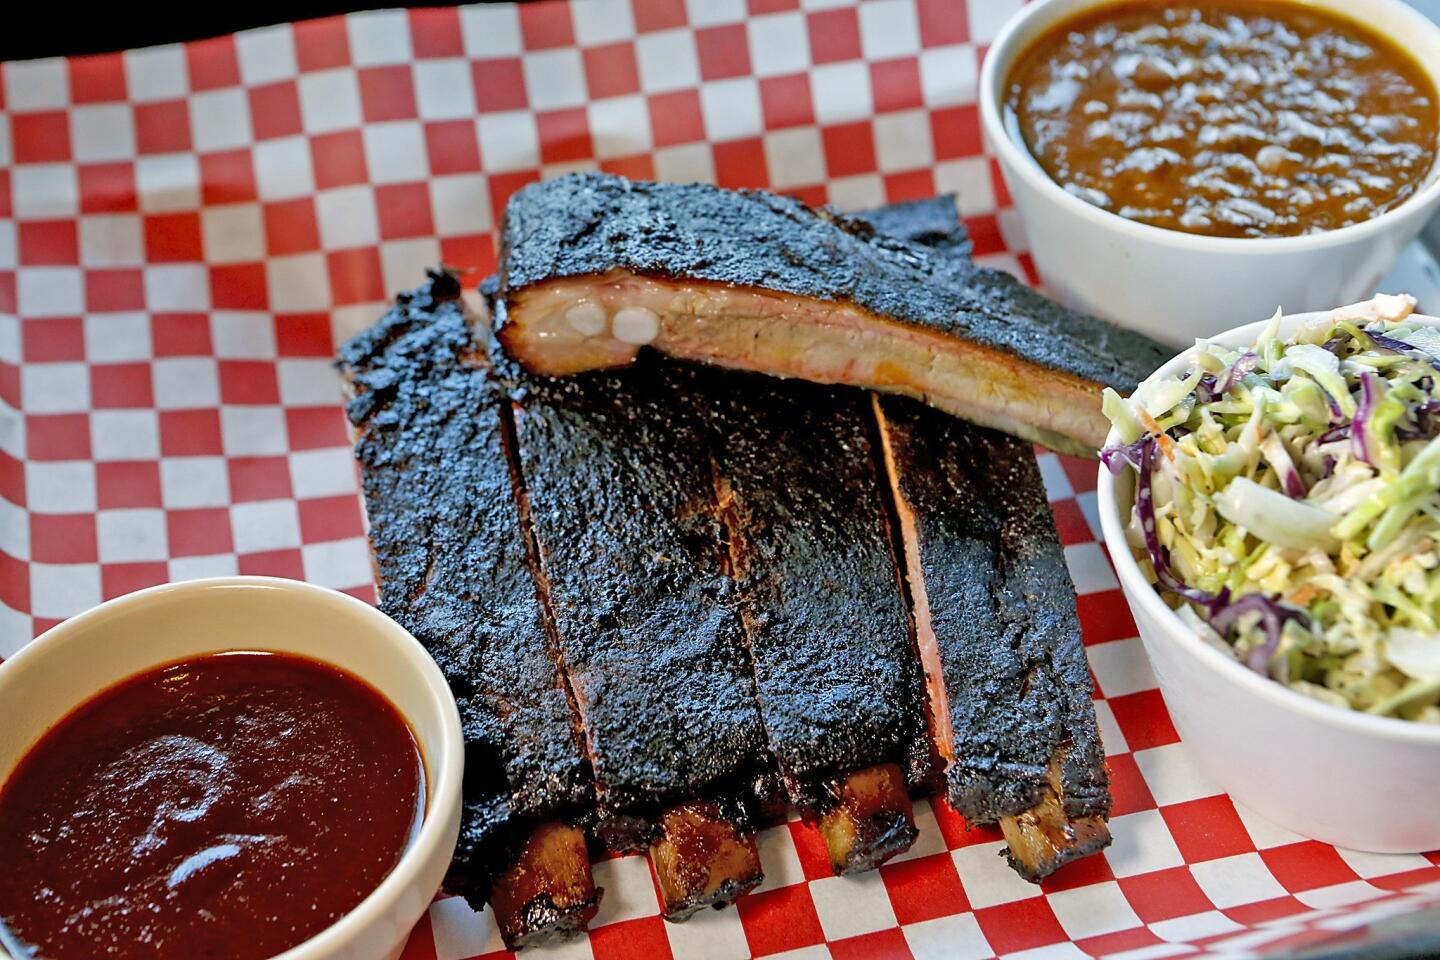 Barbecue pork ribs, baked beans and coleslaw are served at Bludso's BBQ on La Brea in Los Angeles.